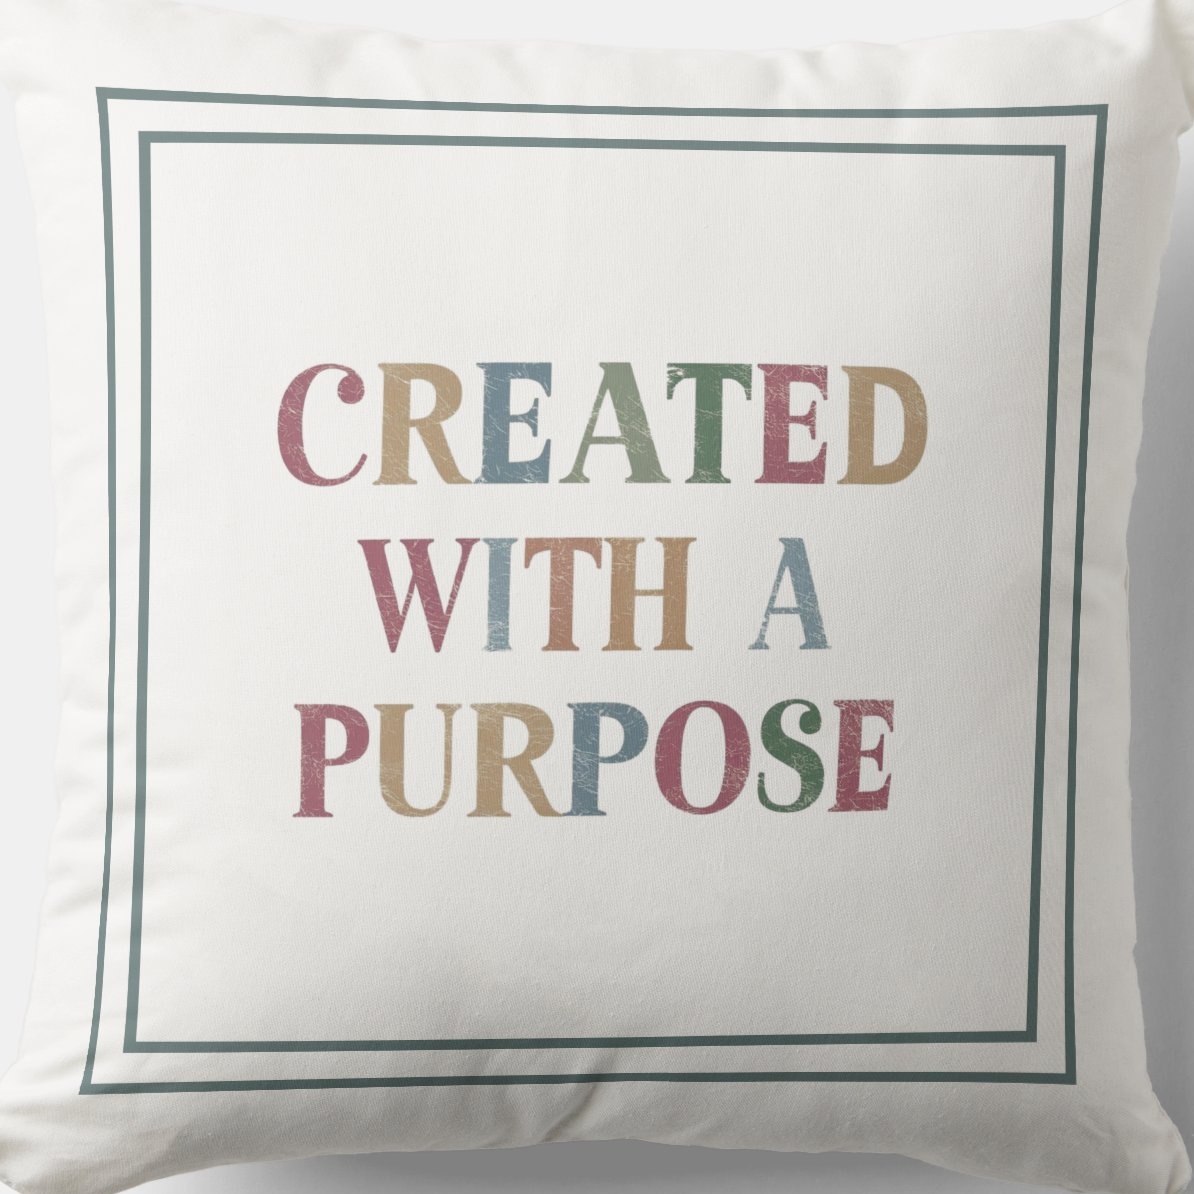 Created with Purpose #Cushion zazzle.com/created_with_a… #Divine Flow Throw #Pillow #Blessing #JesusChrist #JesusSaves #Jesus #christian #spiritual #Homedecoration #uniquegift #giftideas #MothersDayGifts #giftformom #giftidea #HolySpirit #pillows #giftshop #giftsforher #giftsformom